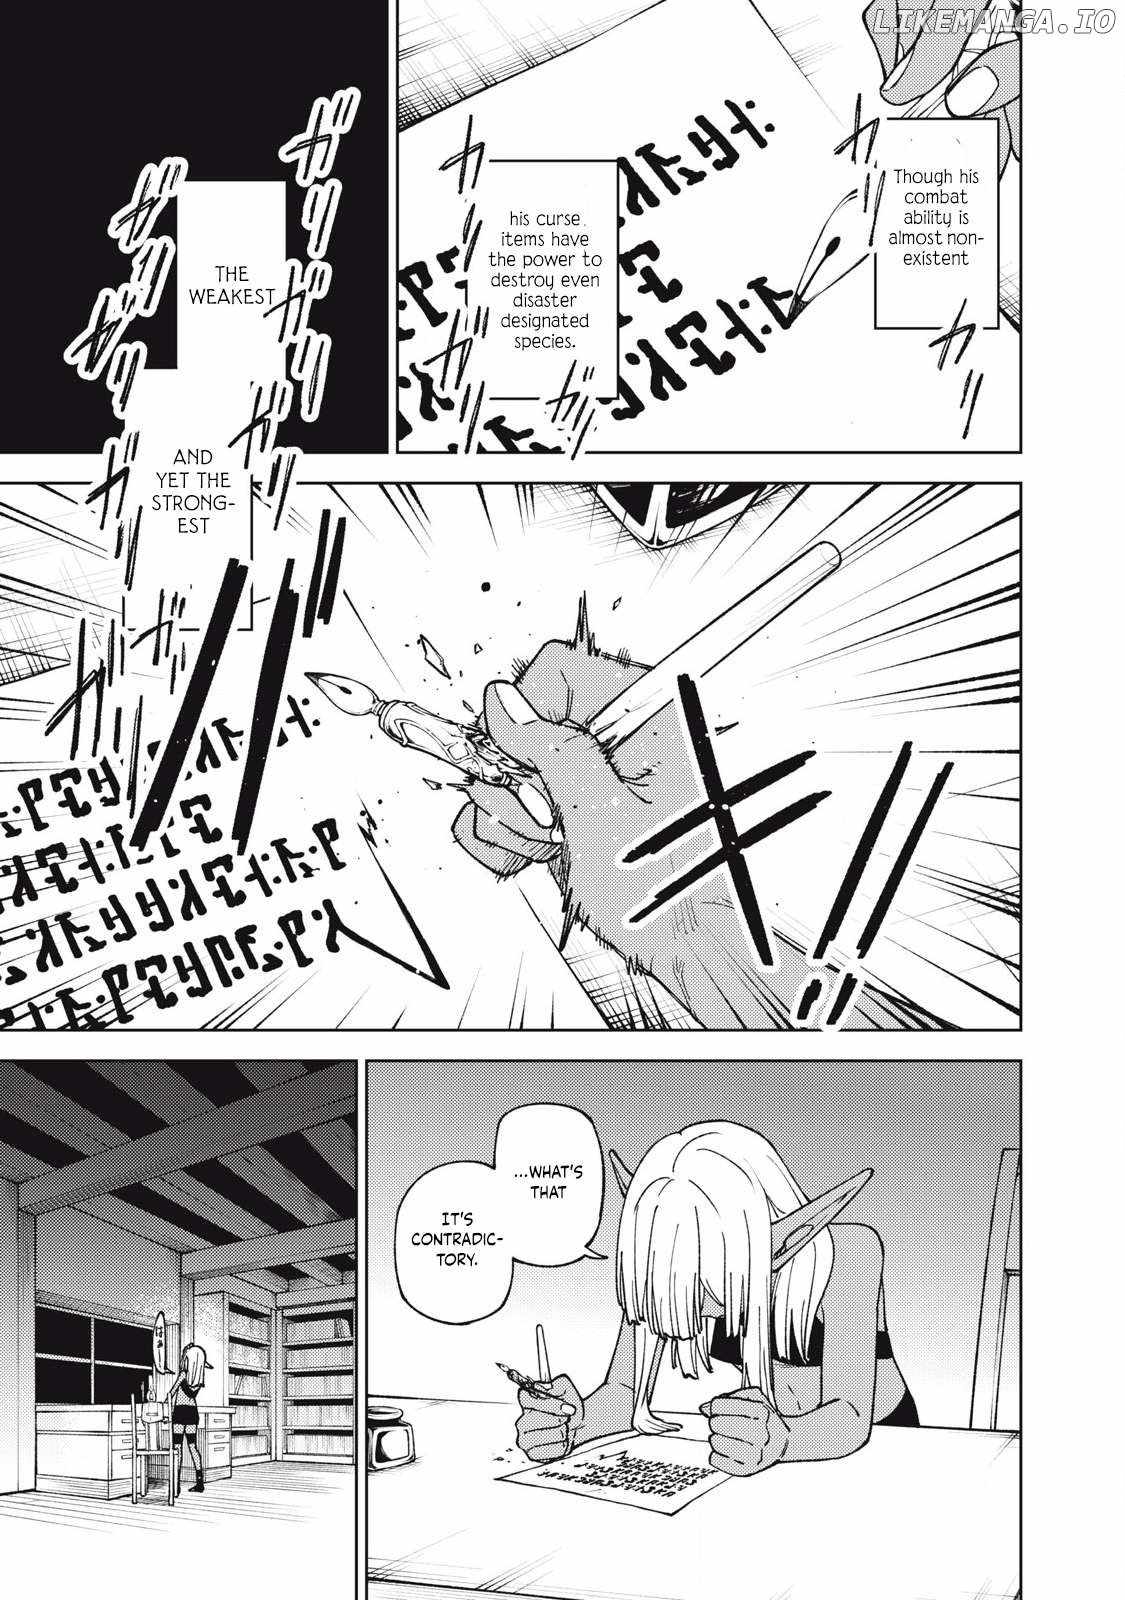 read My S-Rank Party Fired Me for Being a Cursificer ~ I Can Only Make “Cursed Items”, but They're Artifact Class!  Chapter 32-1 Manga Online Free at Mangabuddy, MangaNato,Manhwatop | MangaSo.com